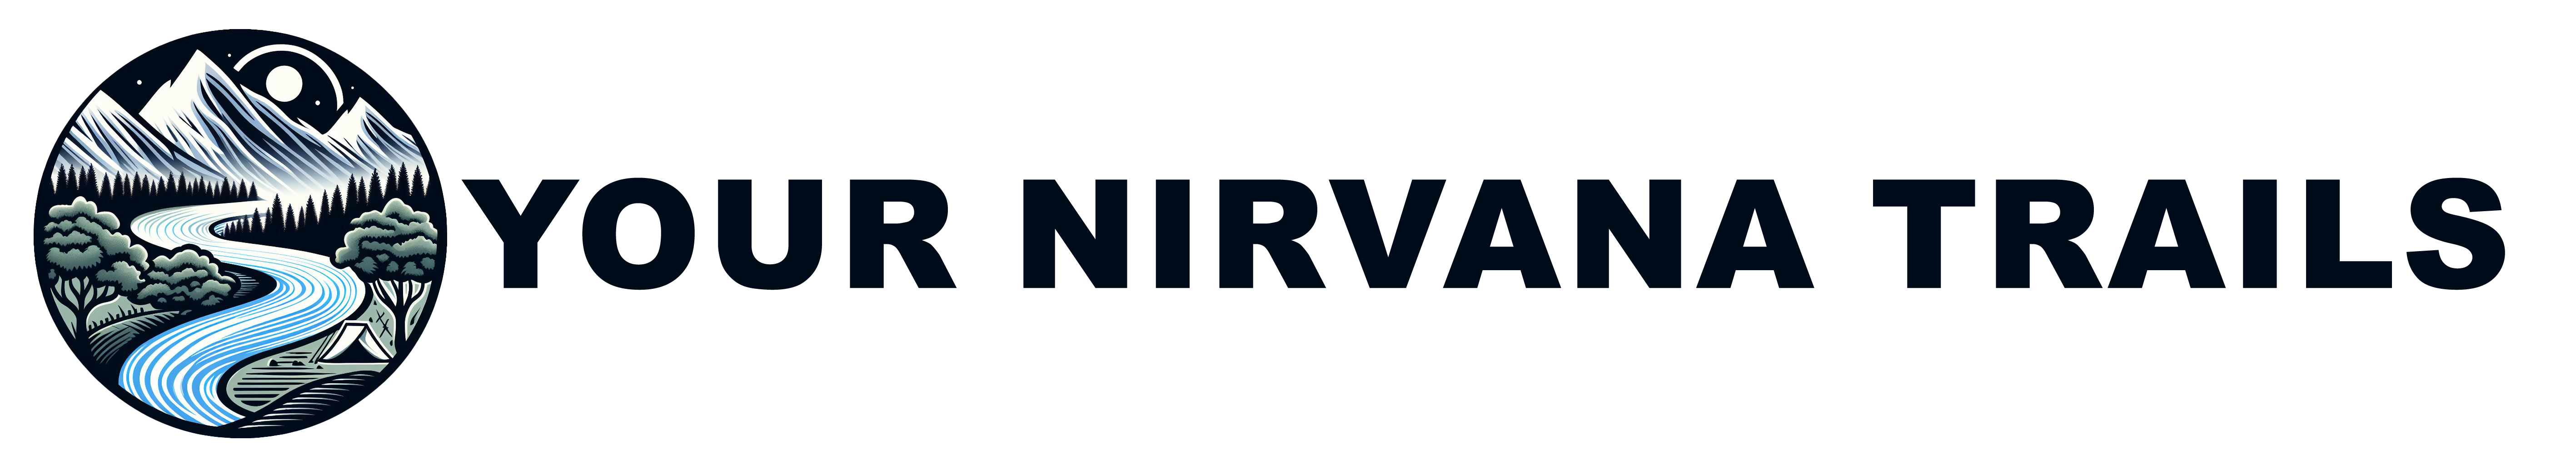 Your Nirvana Trails